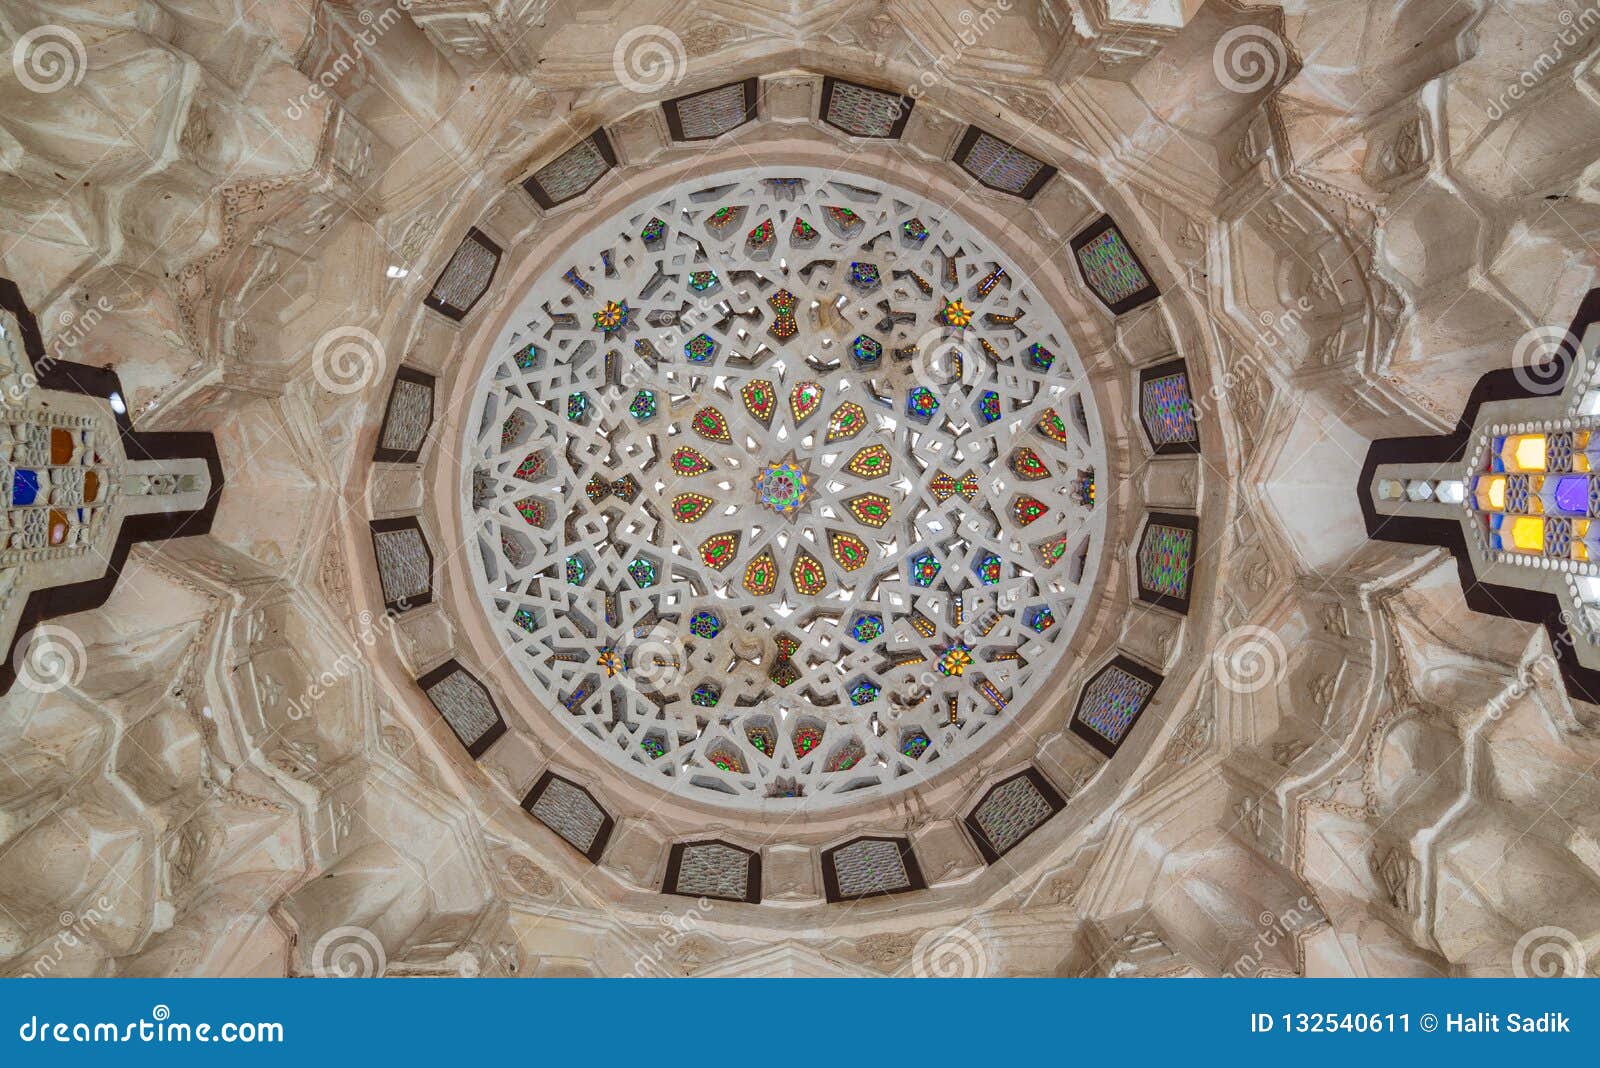 carved plaster dome decorated with colored glass pieces of a pergola in front of el sehemy historical house, cairo, egypt